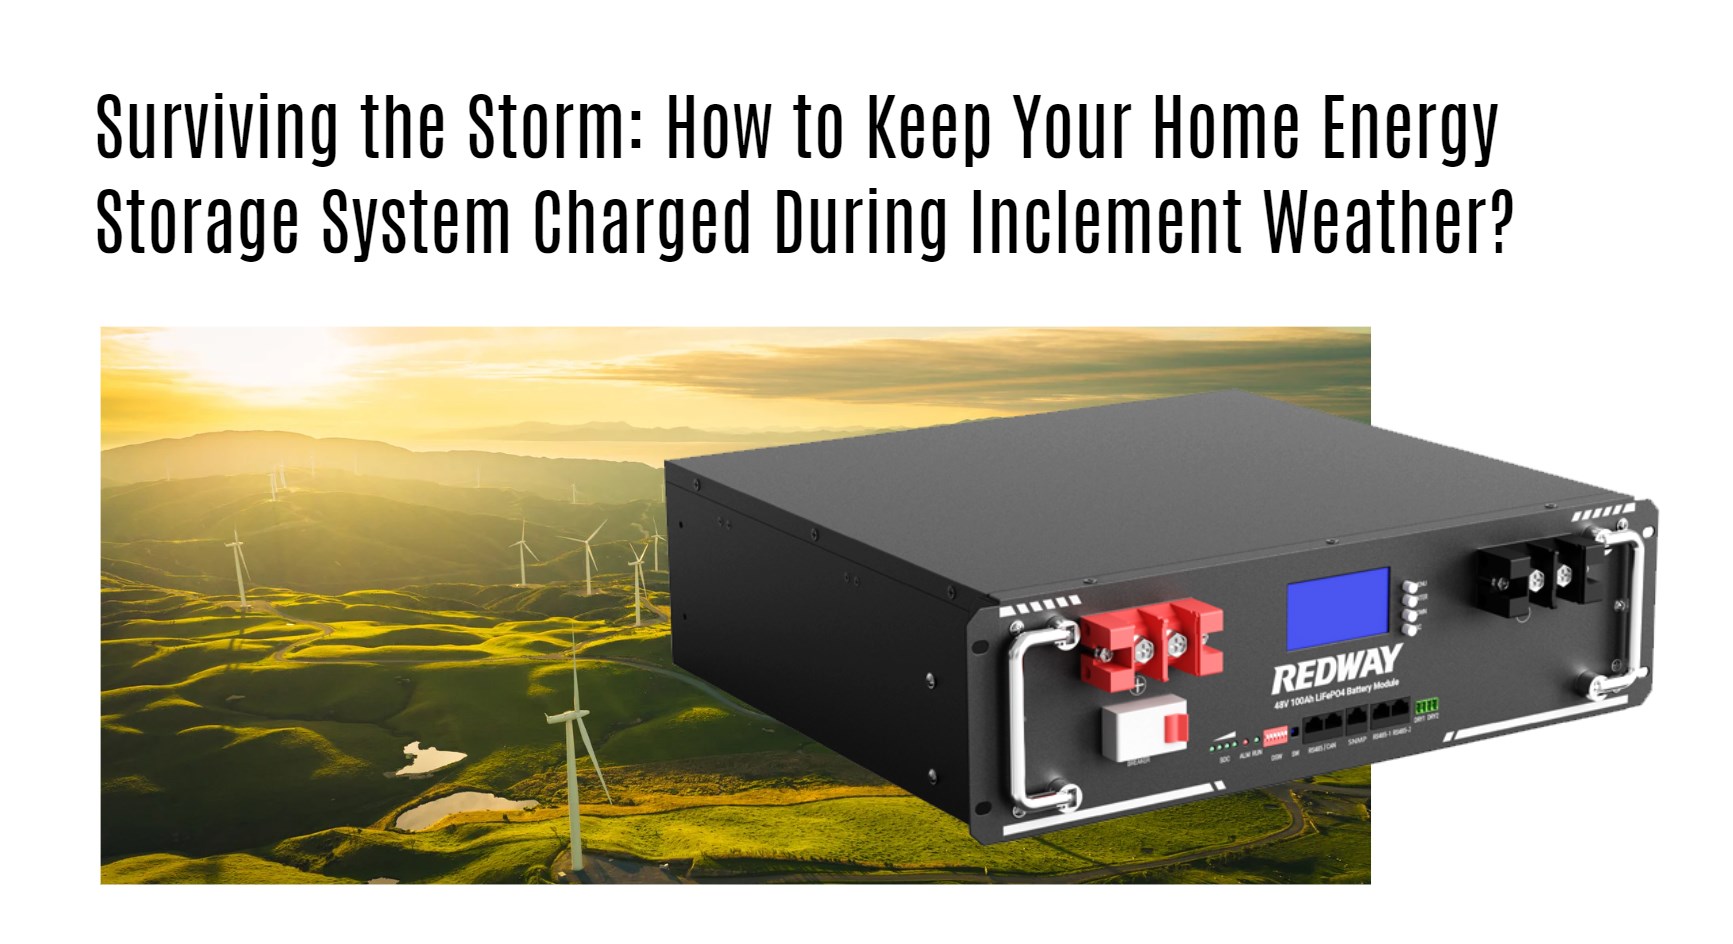 Surviving the Storm: How to Keep Your Home Energy Storage System Charged During Inclement Weather?